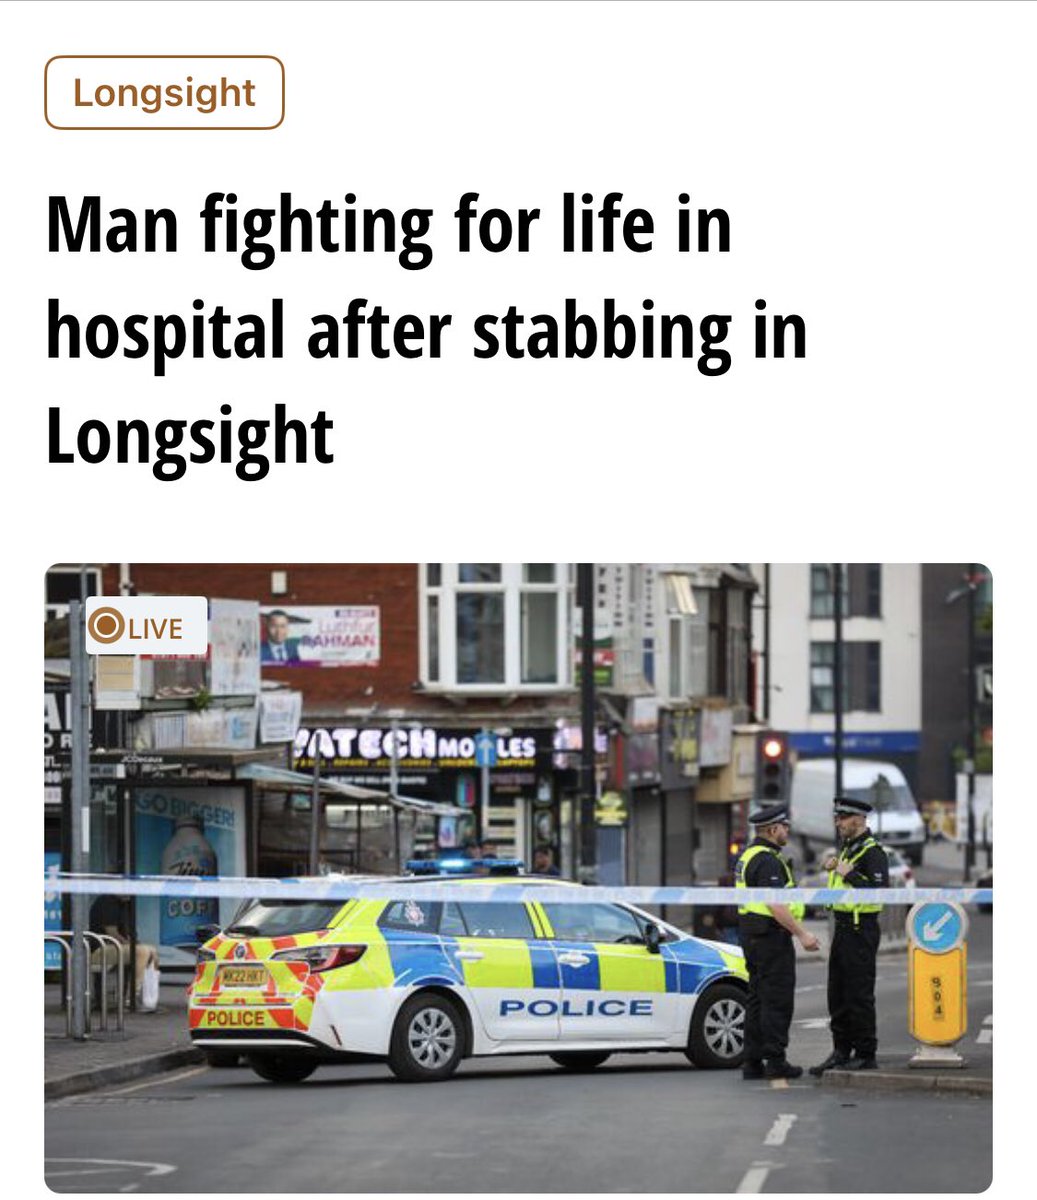 ATTEMPTED MURDER IN LONGSIGHT A man in his 20’s is fighting for his life after he was knifed on Slade Lane on Friday evening. A man in his 50’s has been arrested on suspicion of attempted murder and is currently in custody Multi Culti Longsight is VILE #BrokenBritain